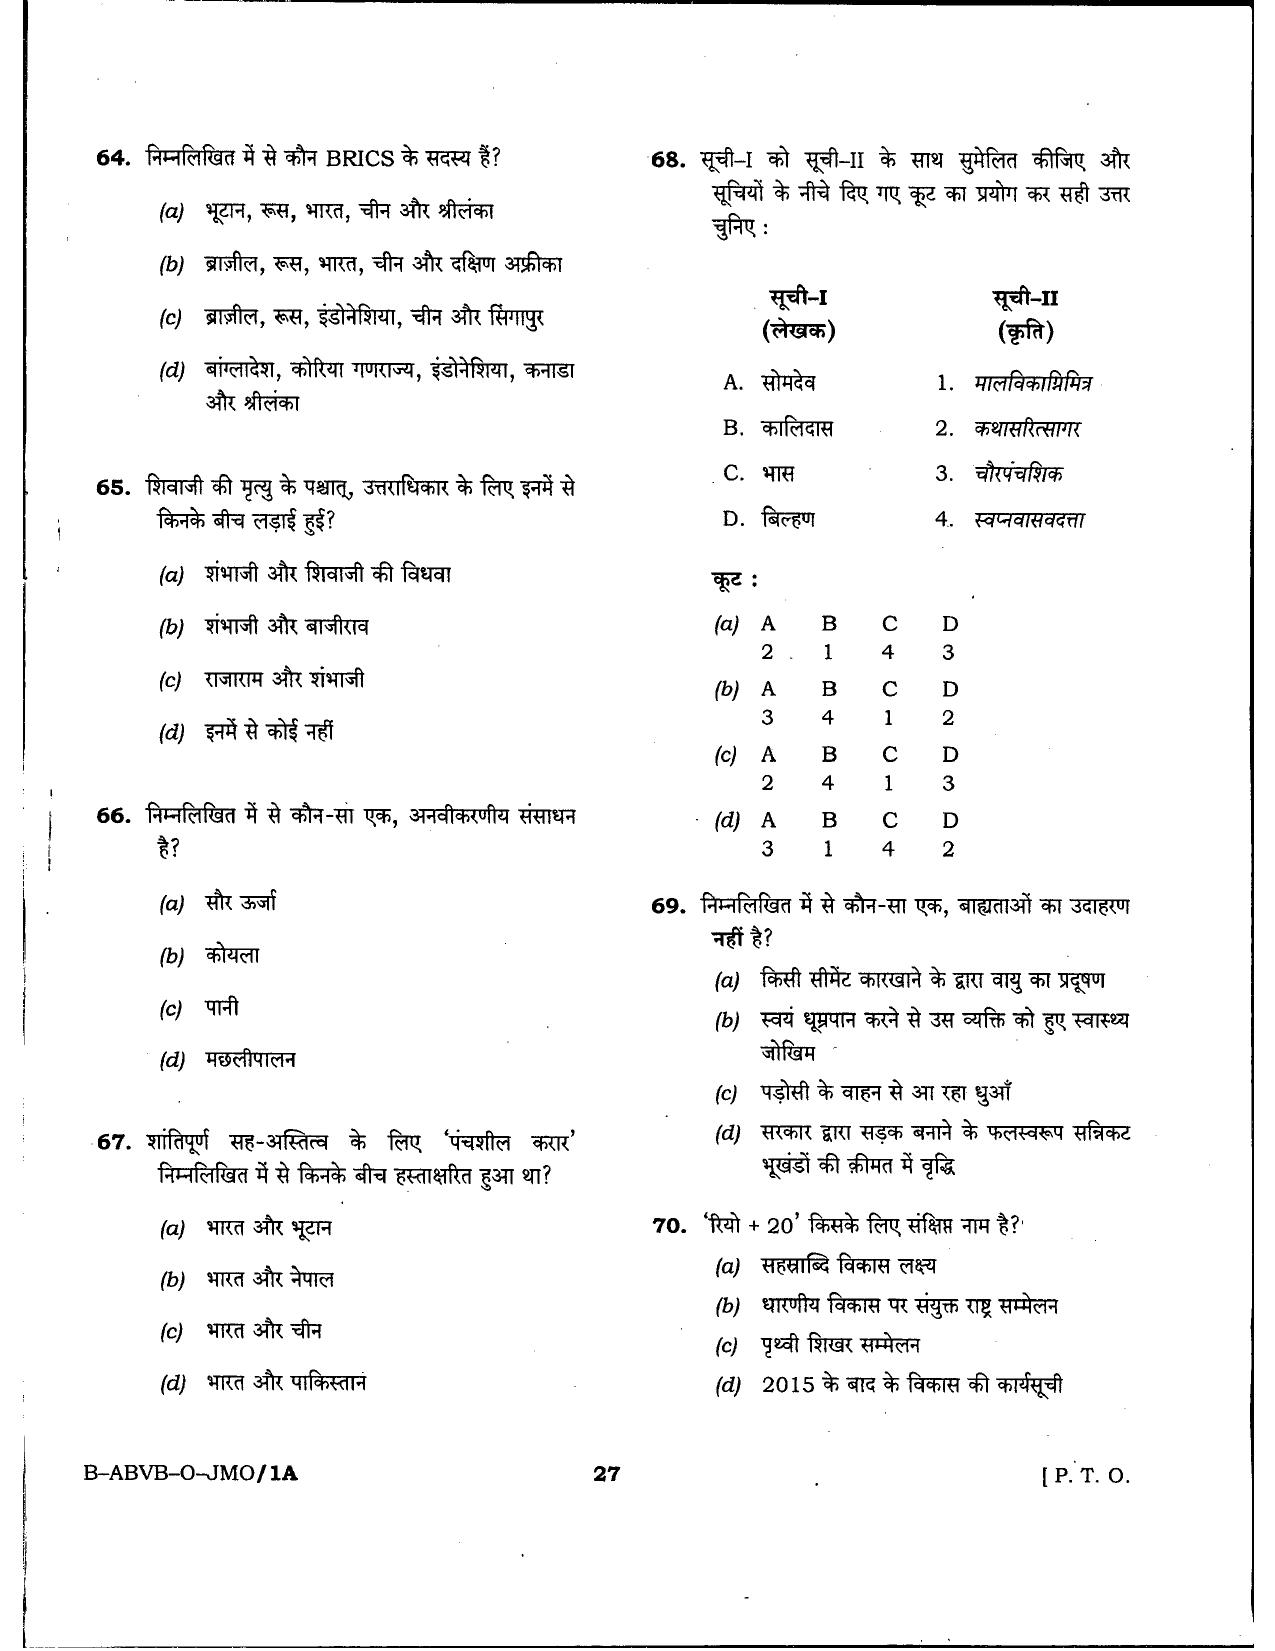 To Get Arunachal Pradesh Police Constable Old Papers General Knowledge - Page 27